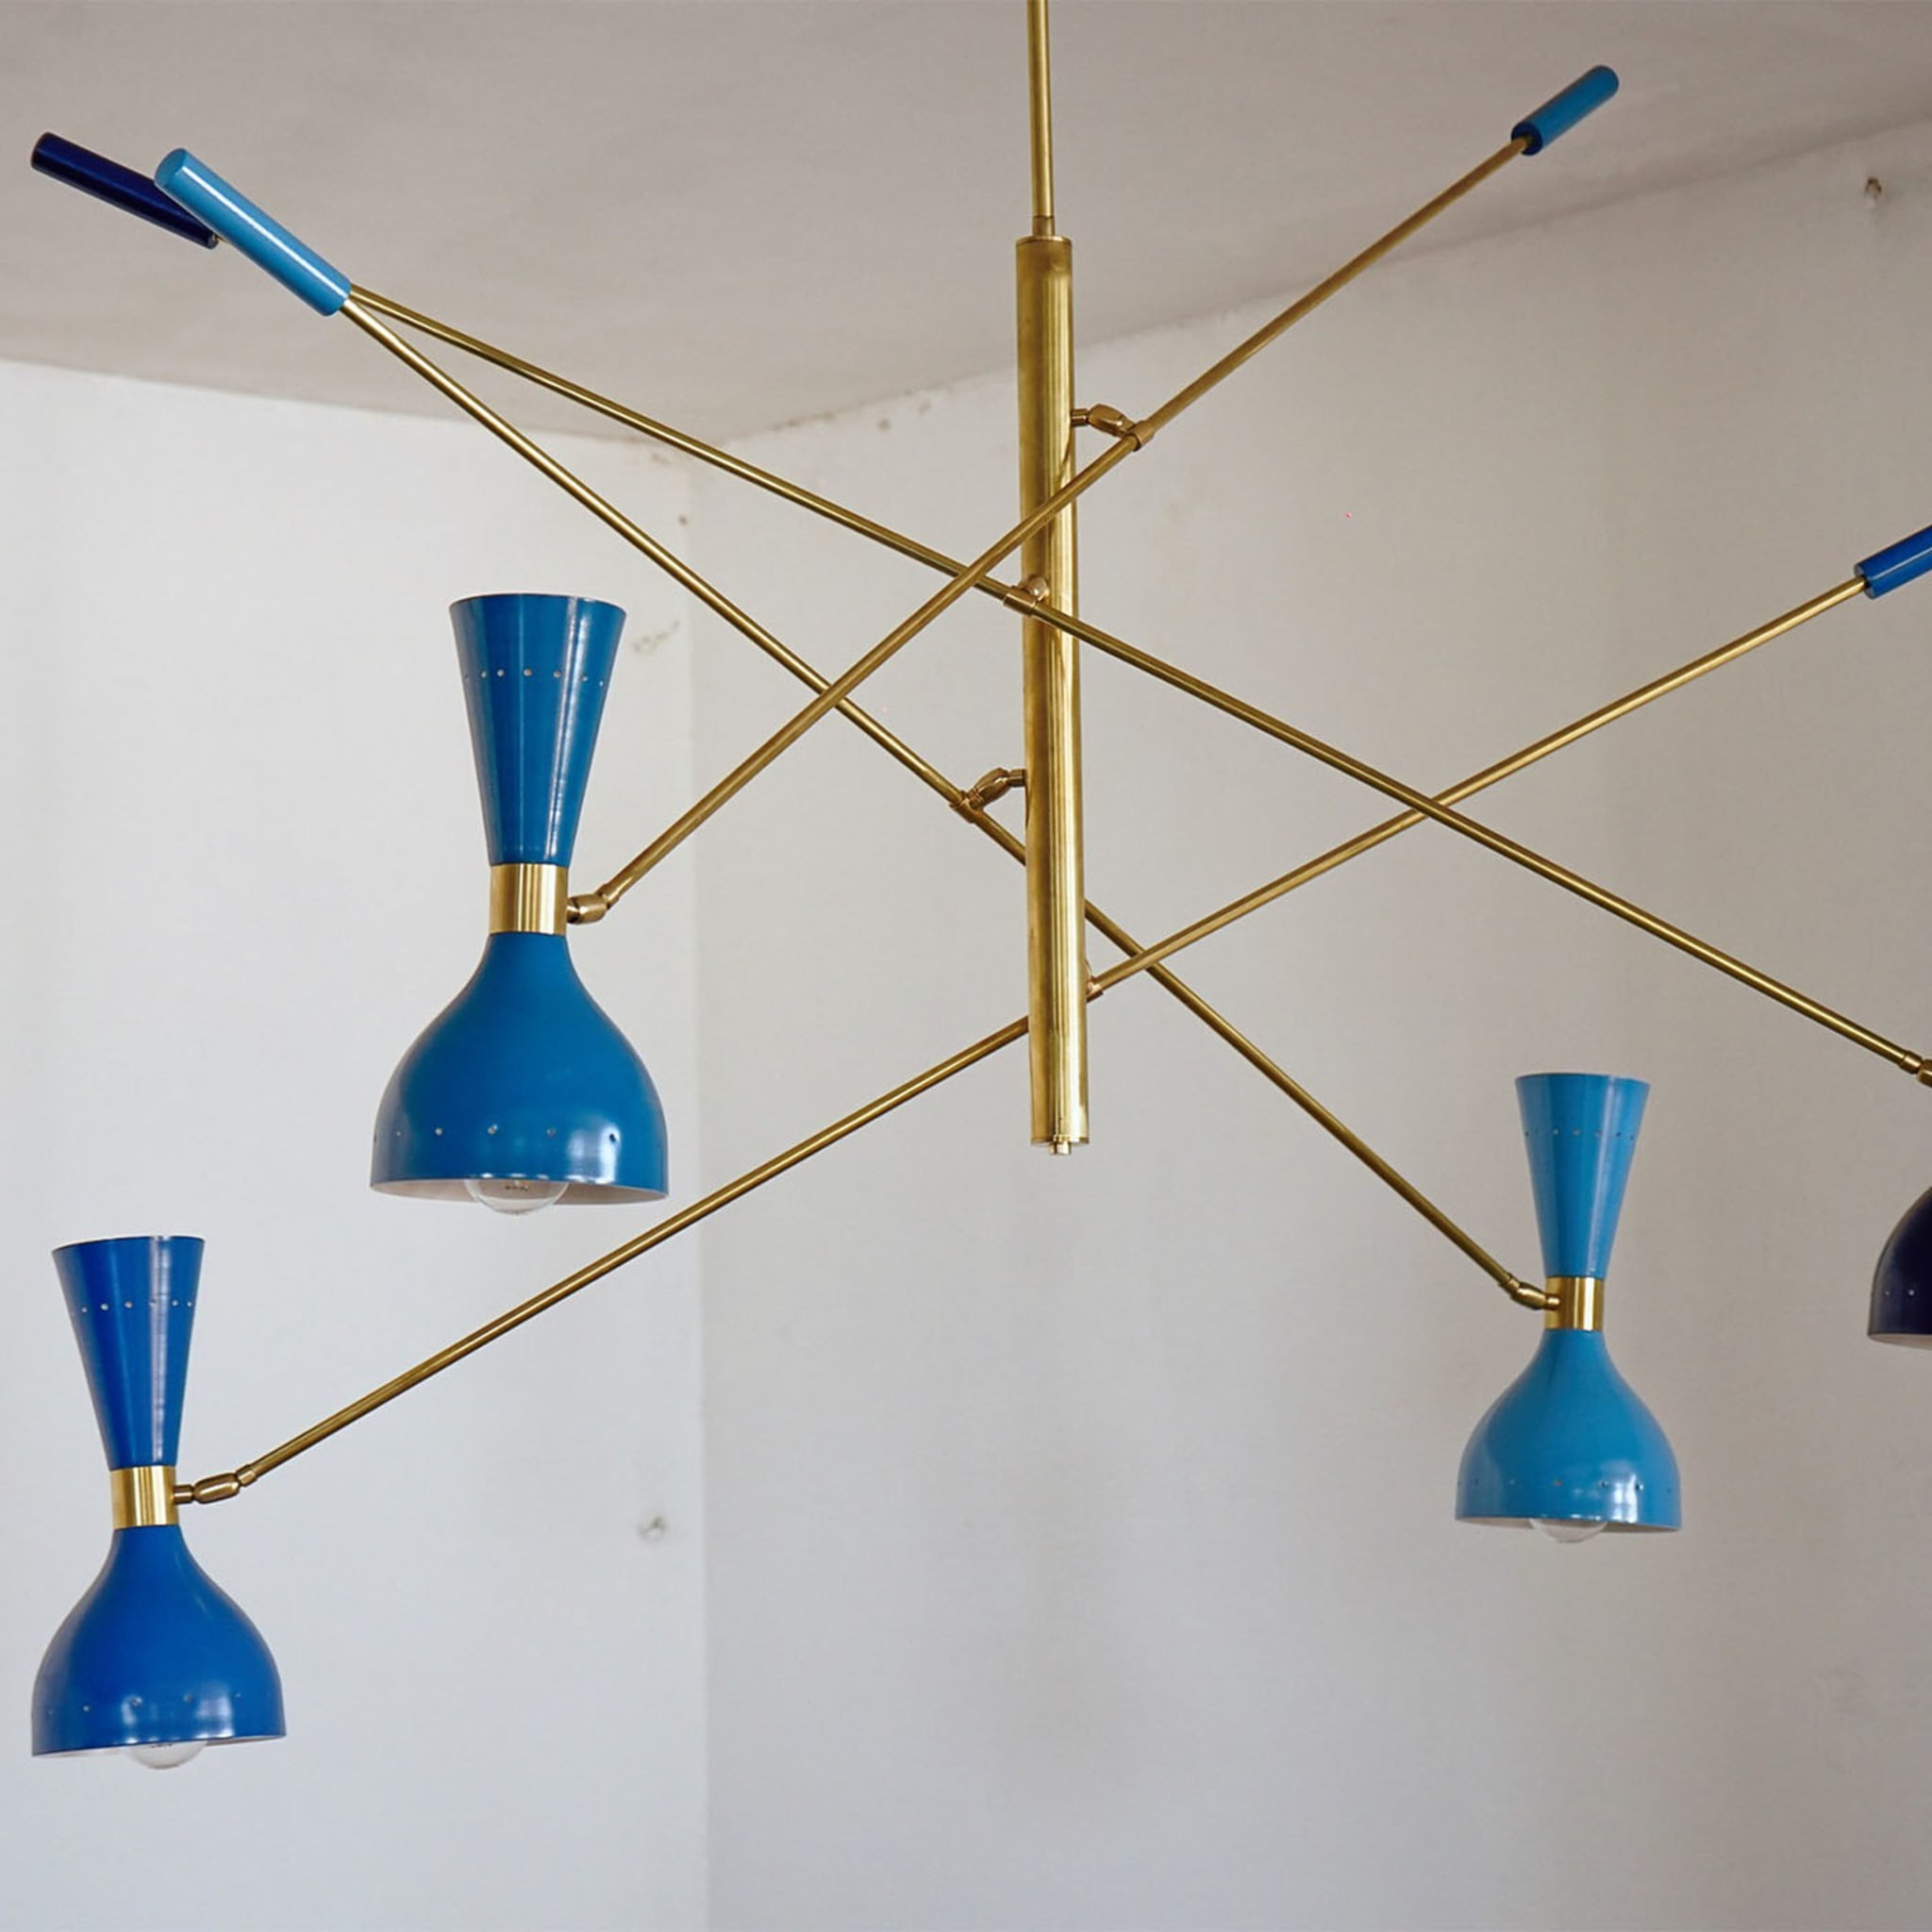 Contrappeso Chandelier, 4 hues of blue "Quadriennale" - Alternative view 2